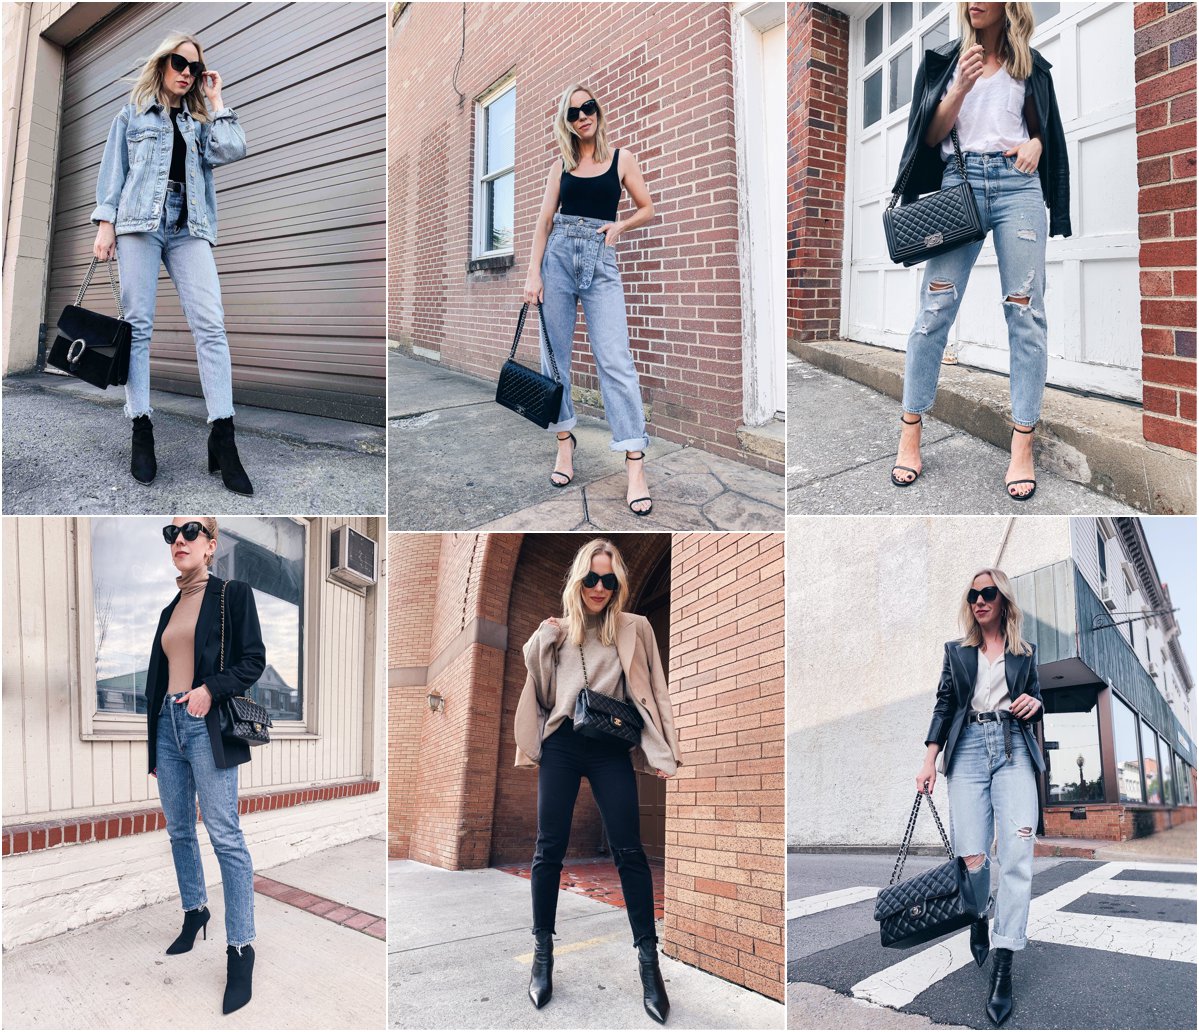 All-Season Layered Look with a Leather Jacket & Straight Leg Jeans -  Meagan's Moda